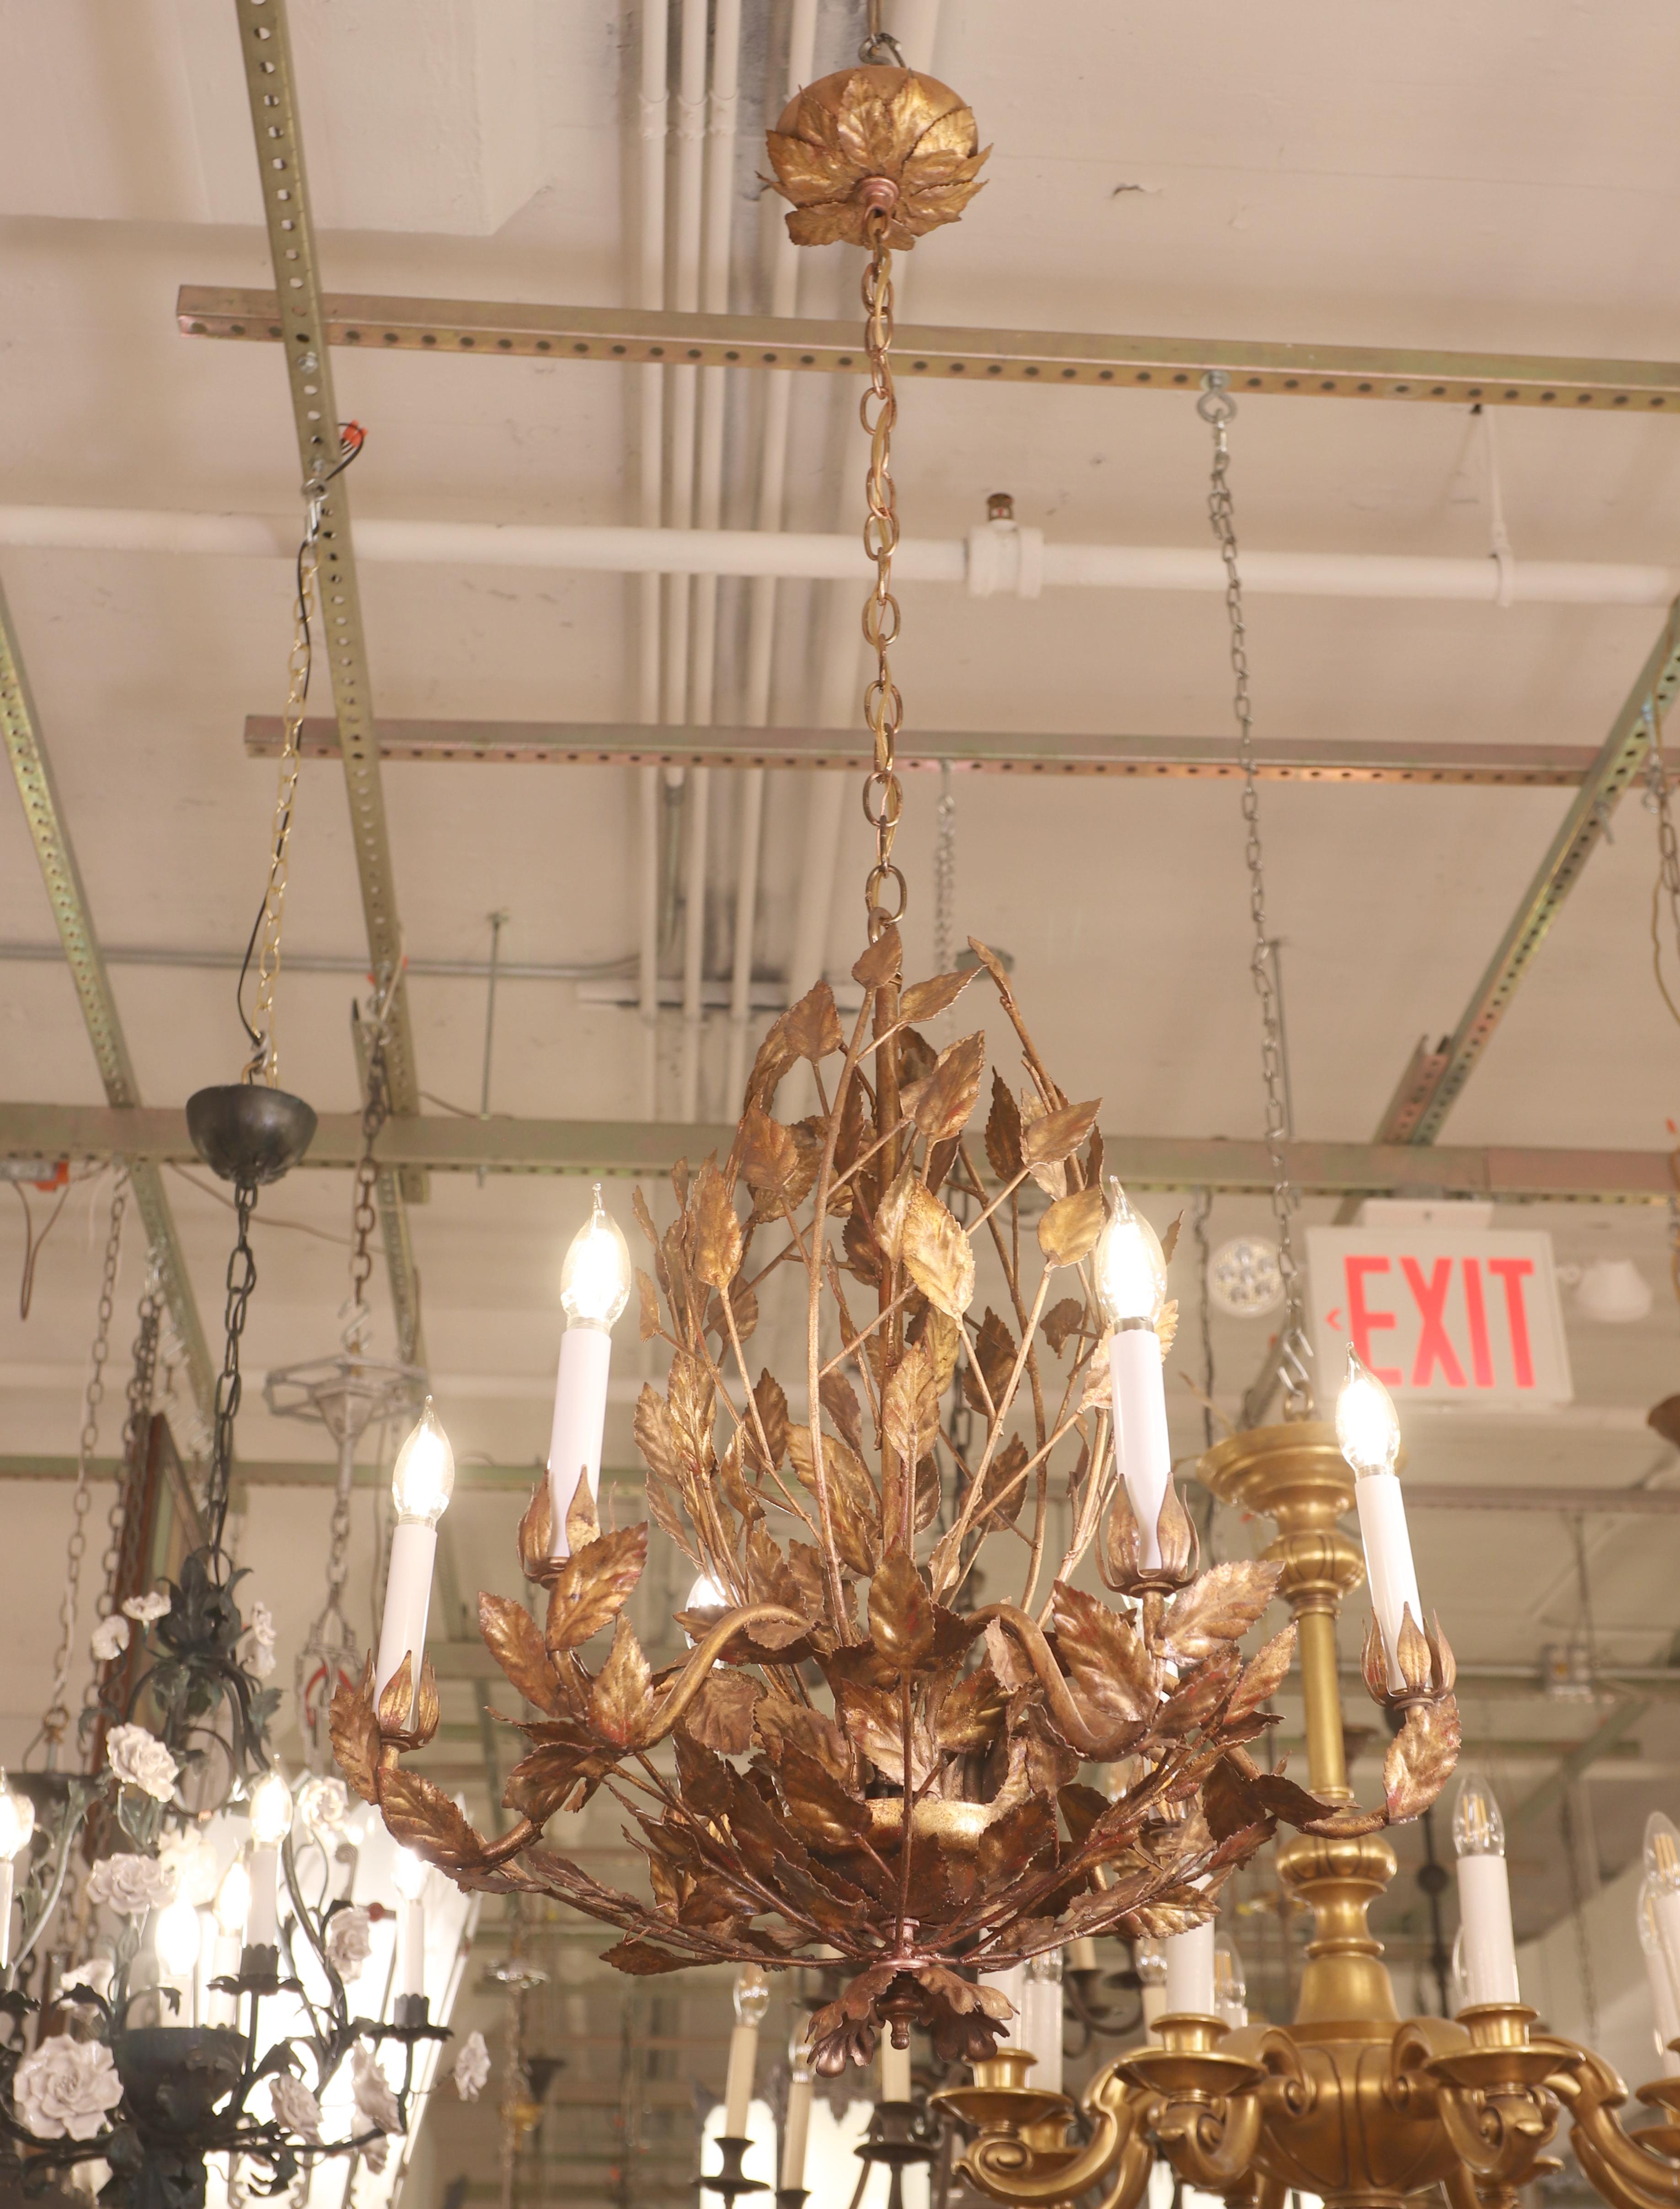 Tole style foliate 6 arm chandelier with an ornamental flower motif canopy. This light requires six candelabra light bulbs. This light is wired and ready to ship. One available. Cleaned and restored. Please note, this item is located in one of our